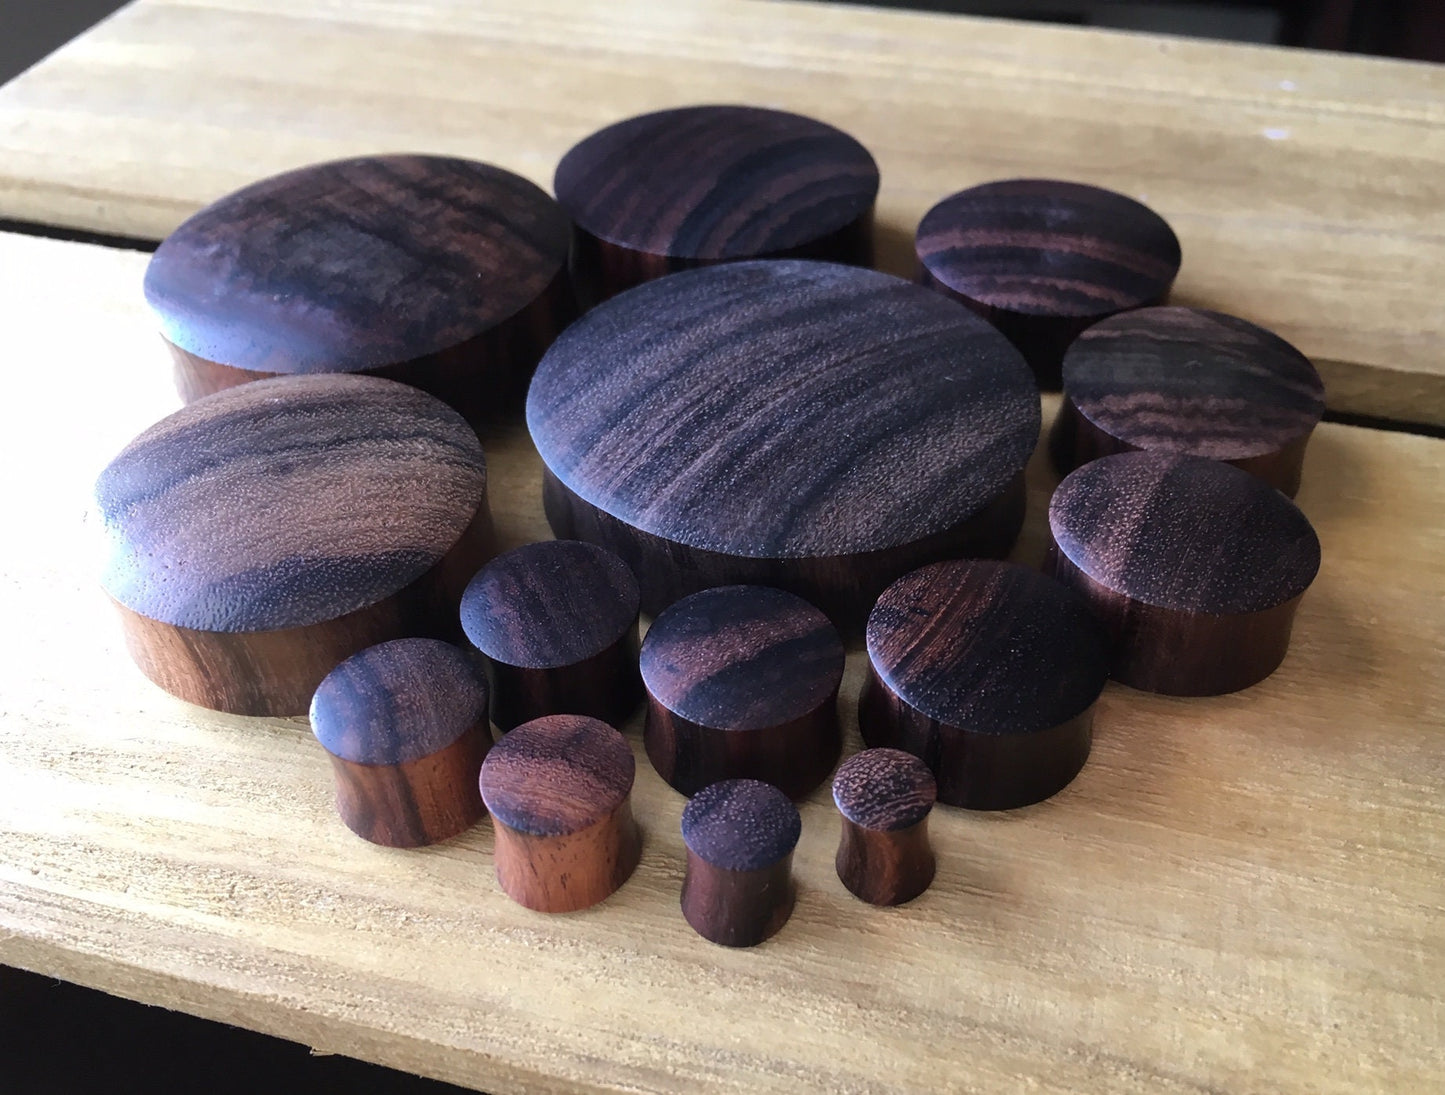 PAIR of Organic Brown Sono Wood Plugs - Gauges 2g (6mm) up to 2" (50mm) available!